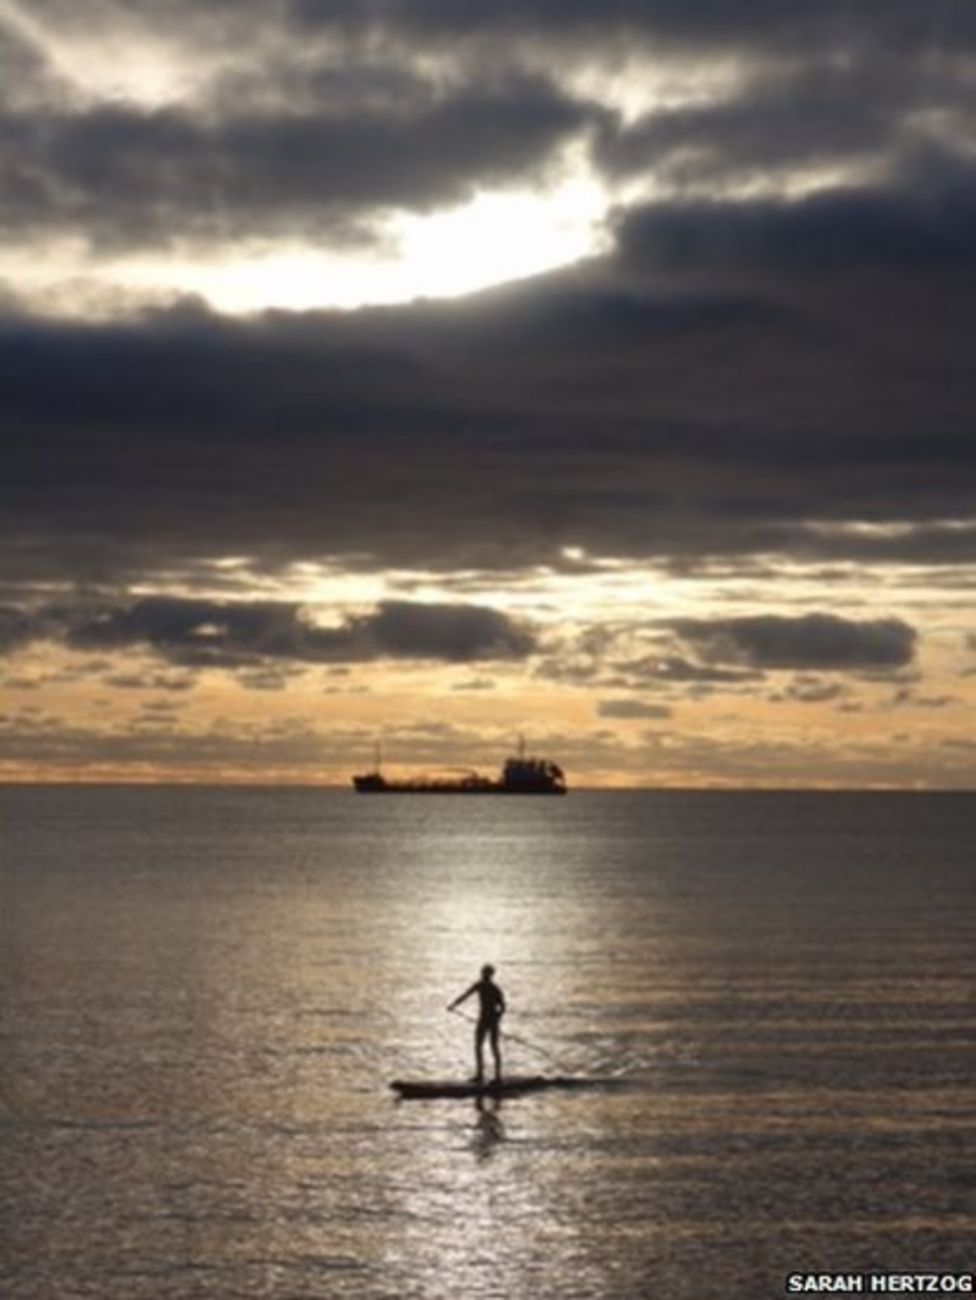 A figure on a paddle board in the sea is silhouetted in the sunrise